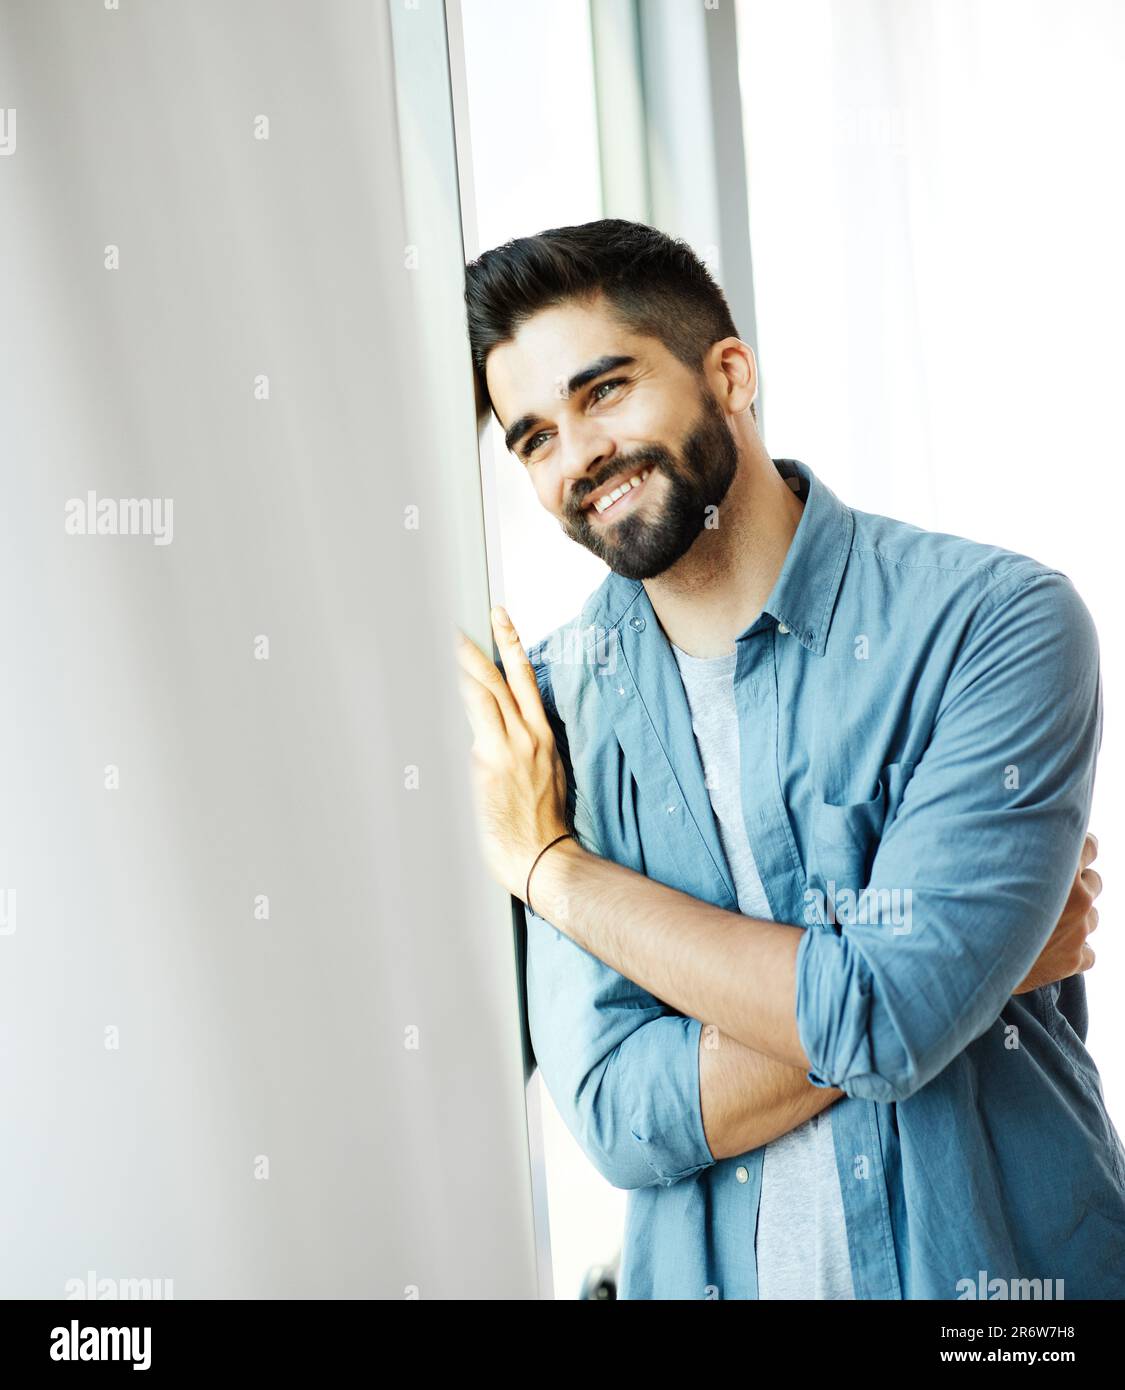 portrait man fashion model male posing young happy lifestyle handsome smiling shirt casual guy confident Stock Photo